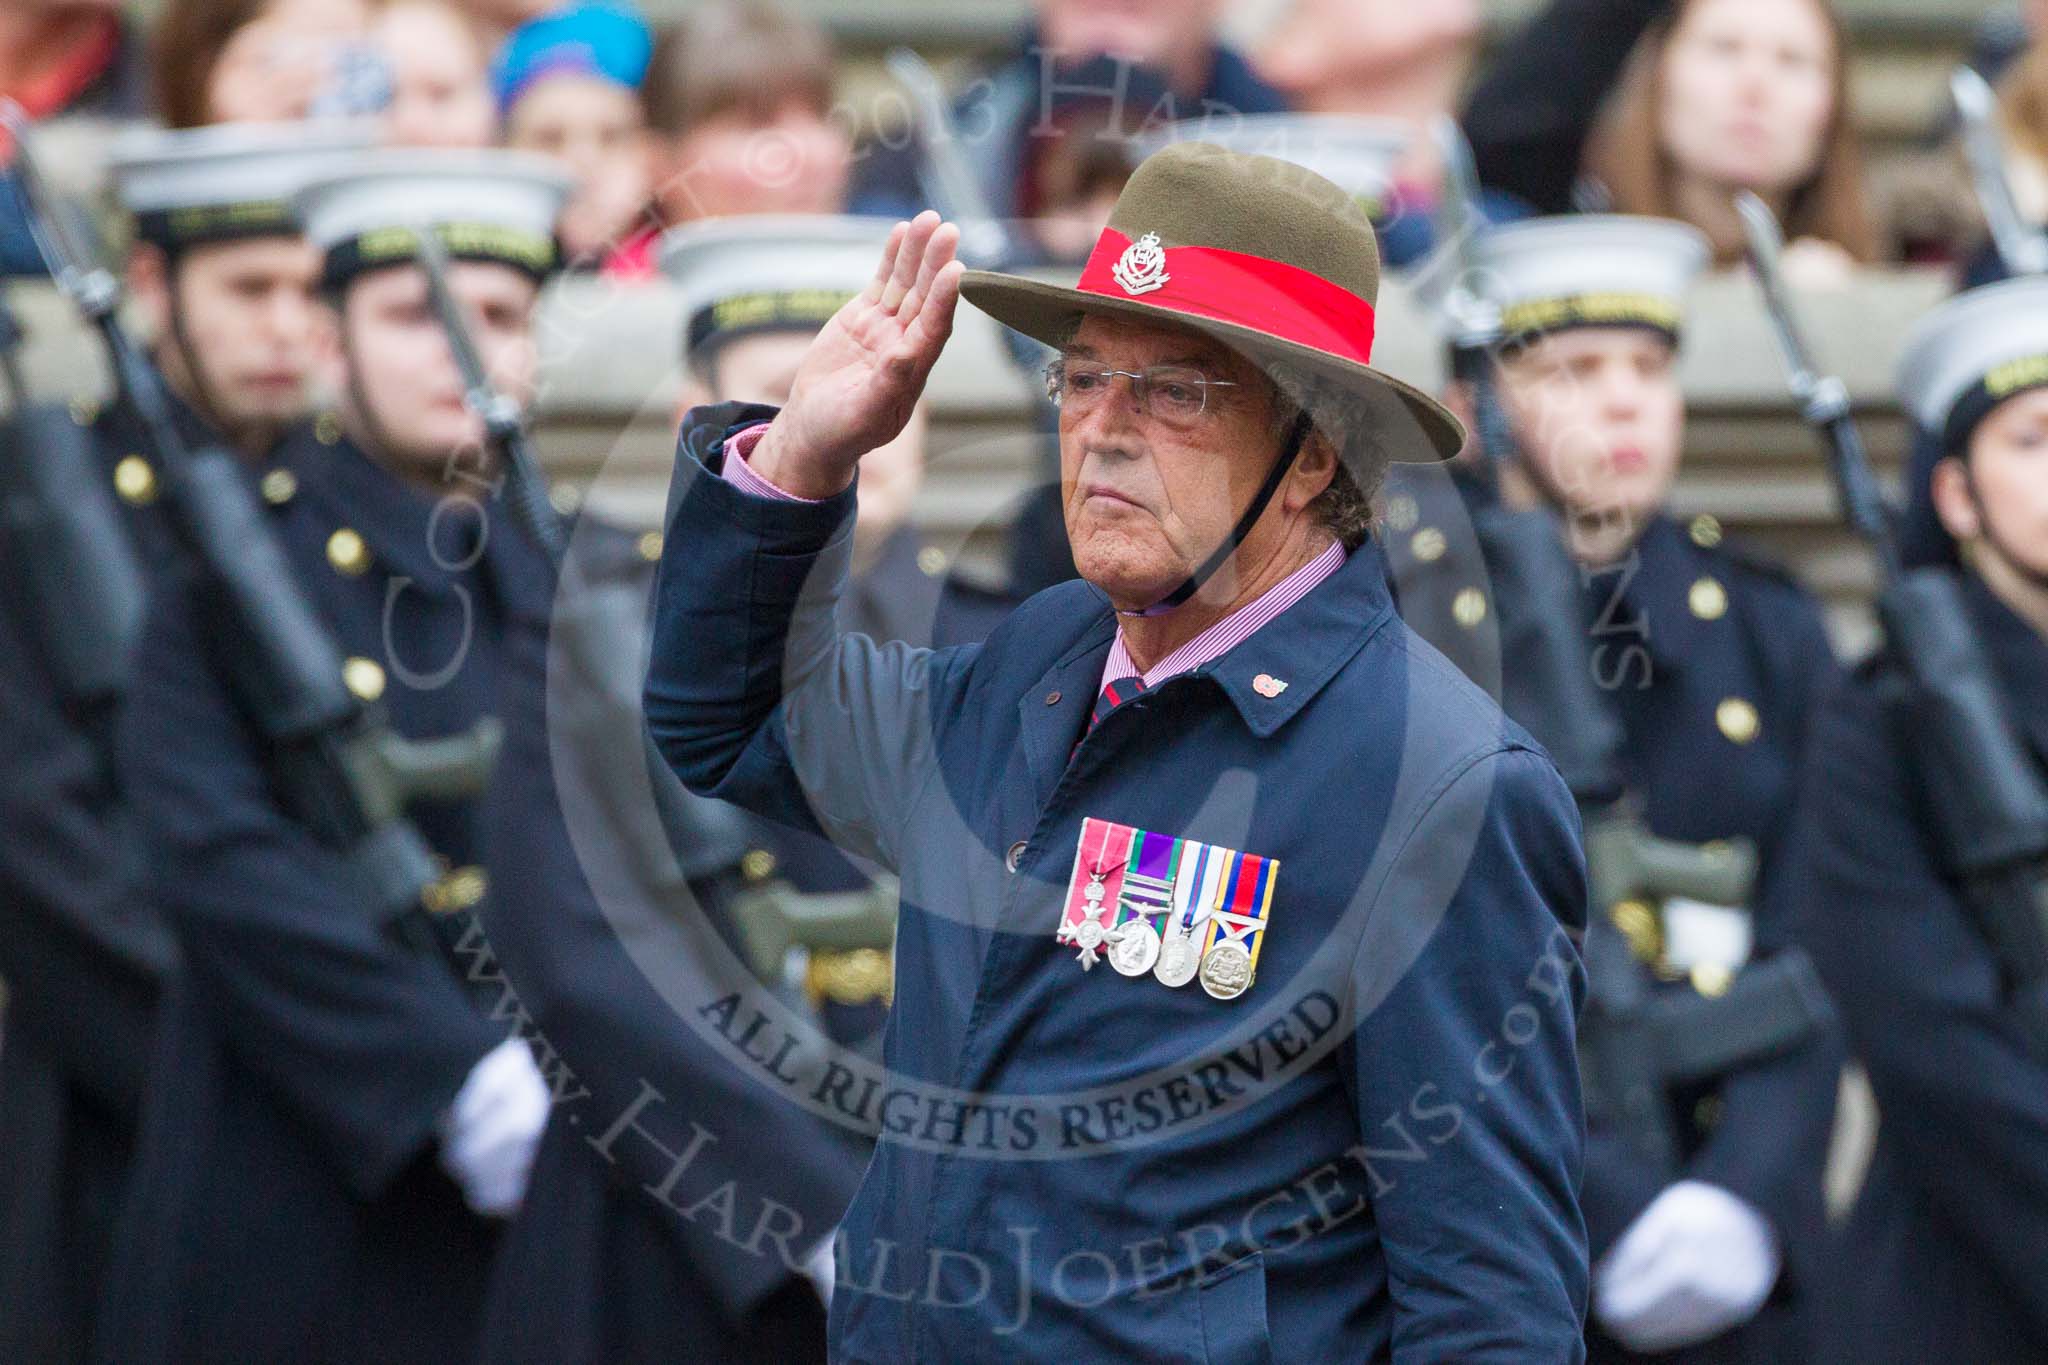 Remembrance Sunday at the Cenotaph 2015: Group B16, Royal Military Police Association.
Cenotaph, Whitehall, London SW1,
London,
Greater London,
United Kingdom,
on 08 November 2015 at 11:39, image #129